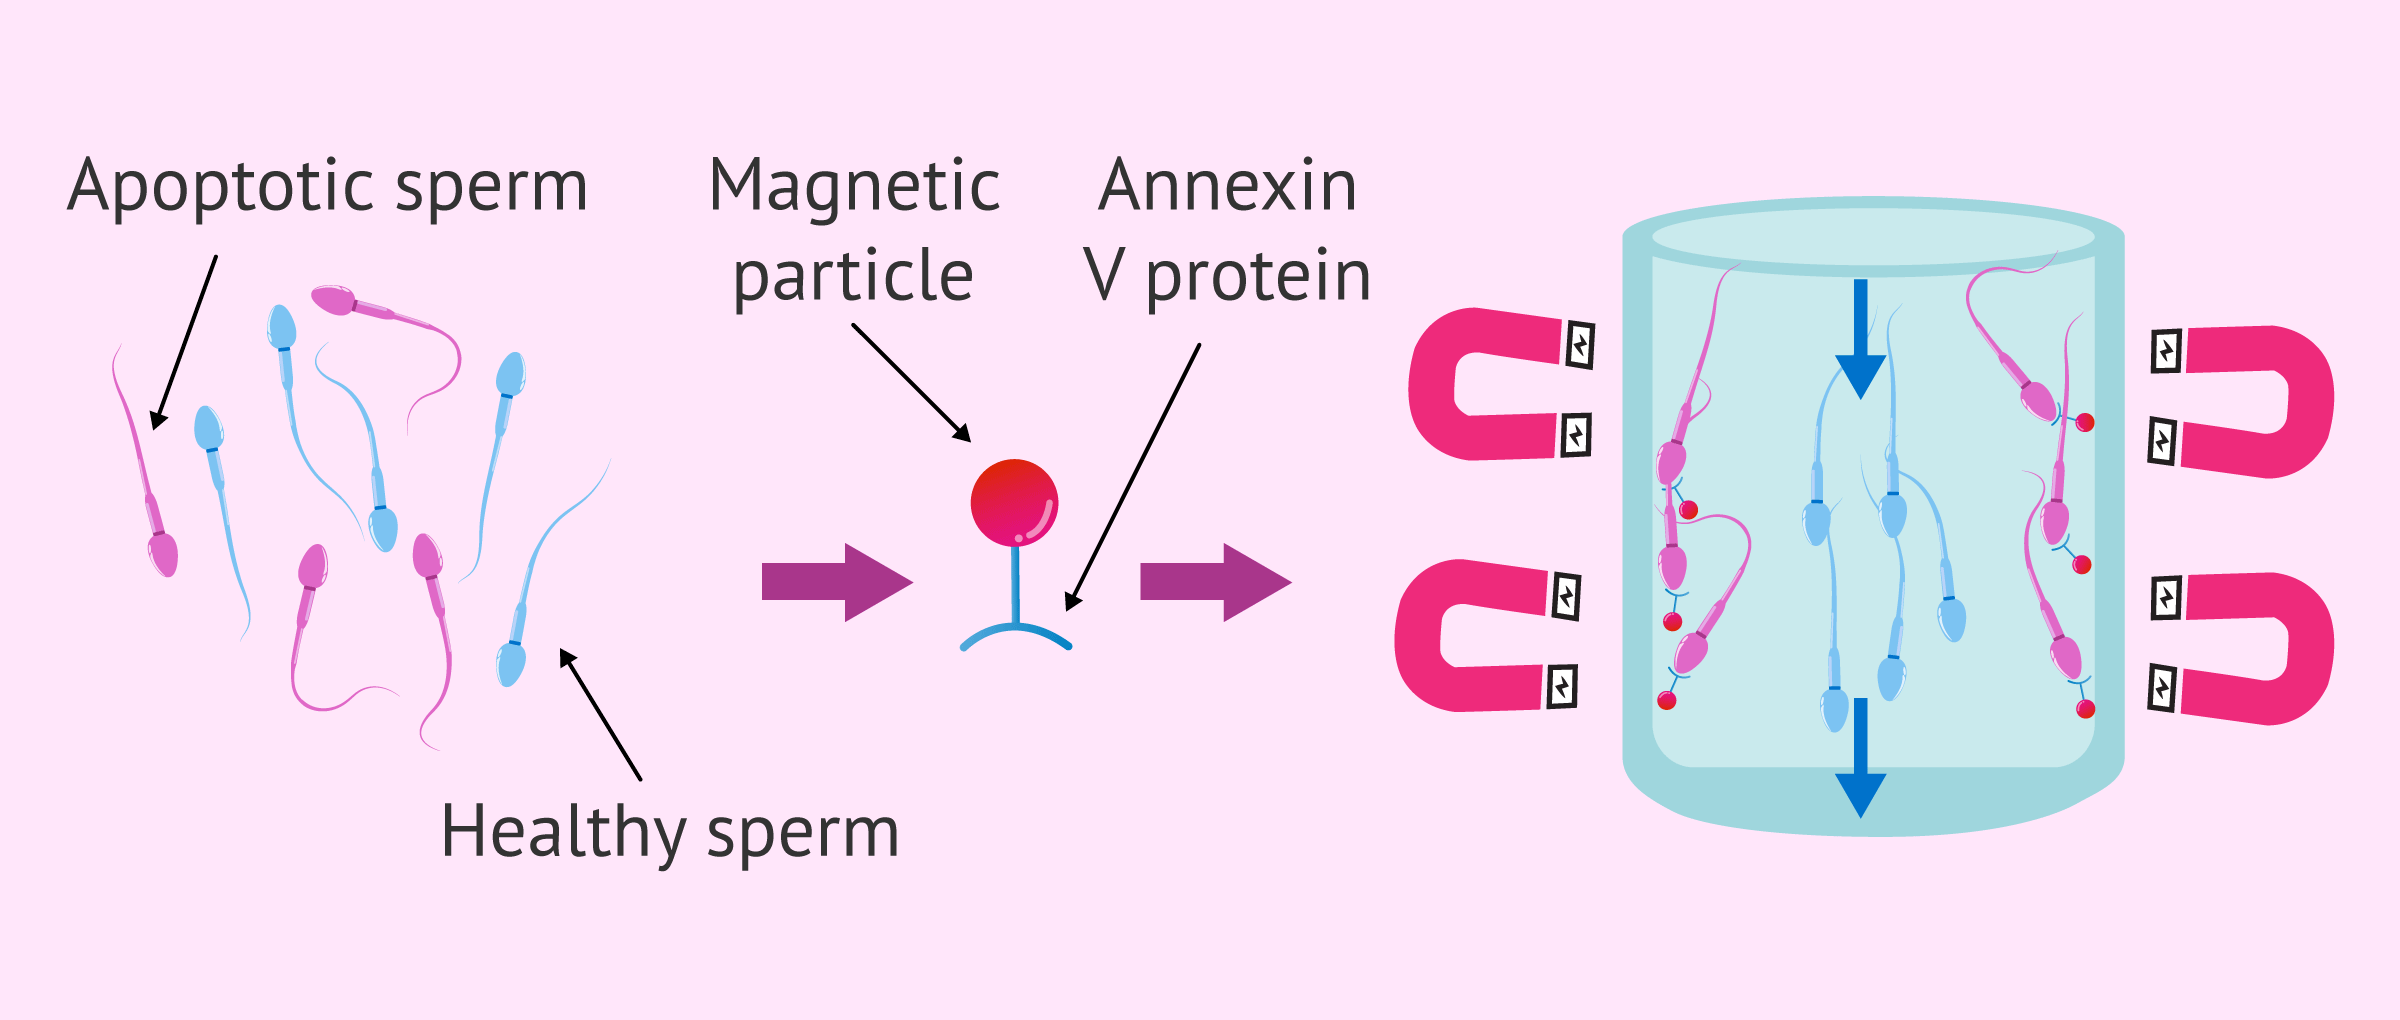 Sperm sorting with annexin V or MACS columns